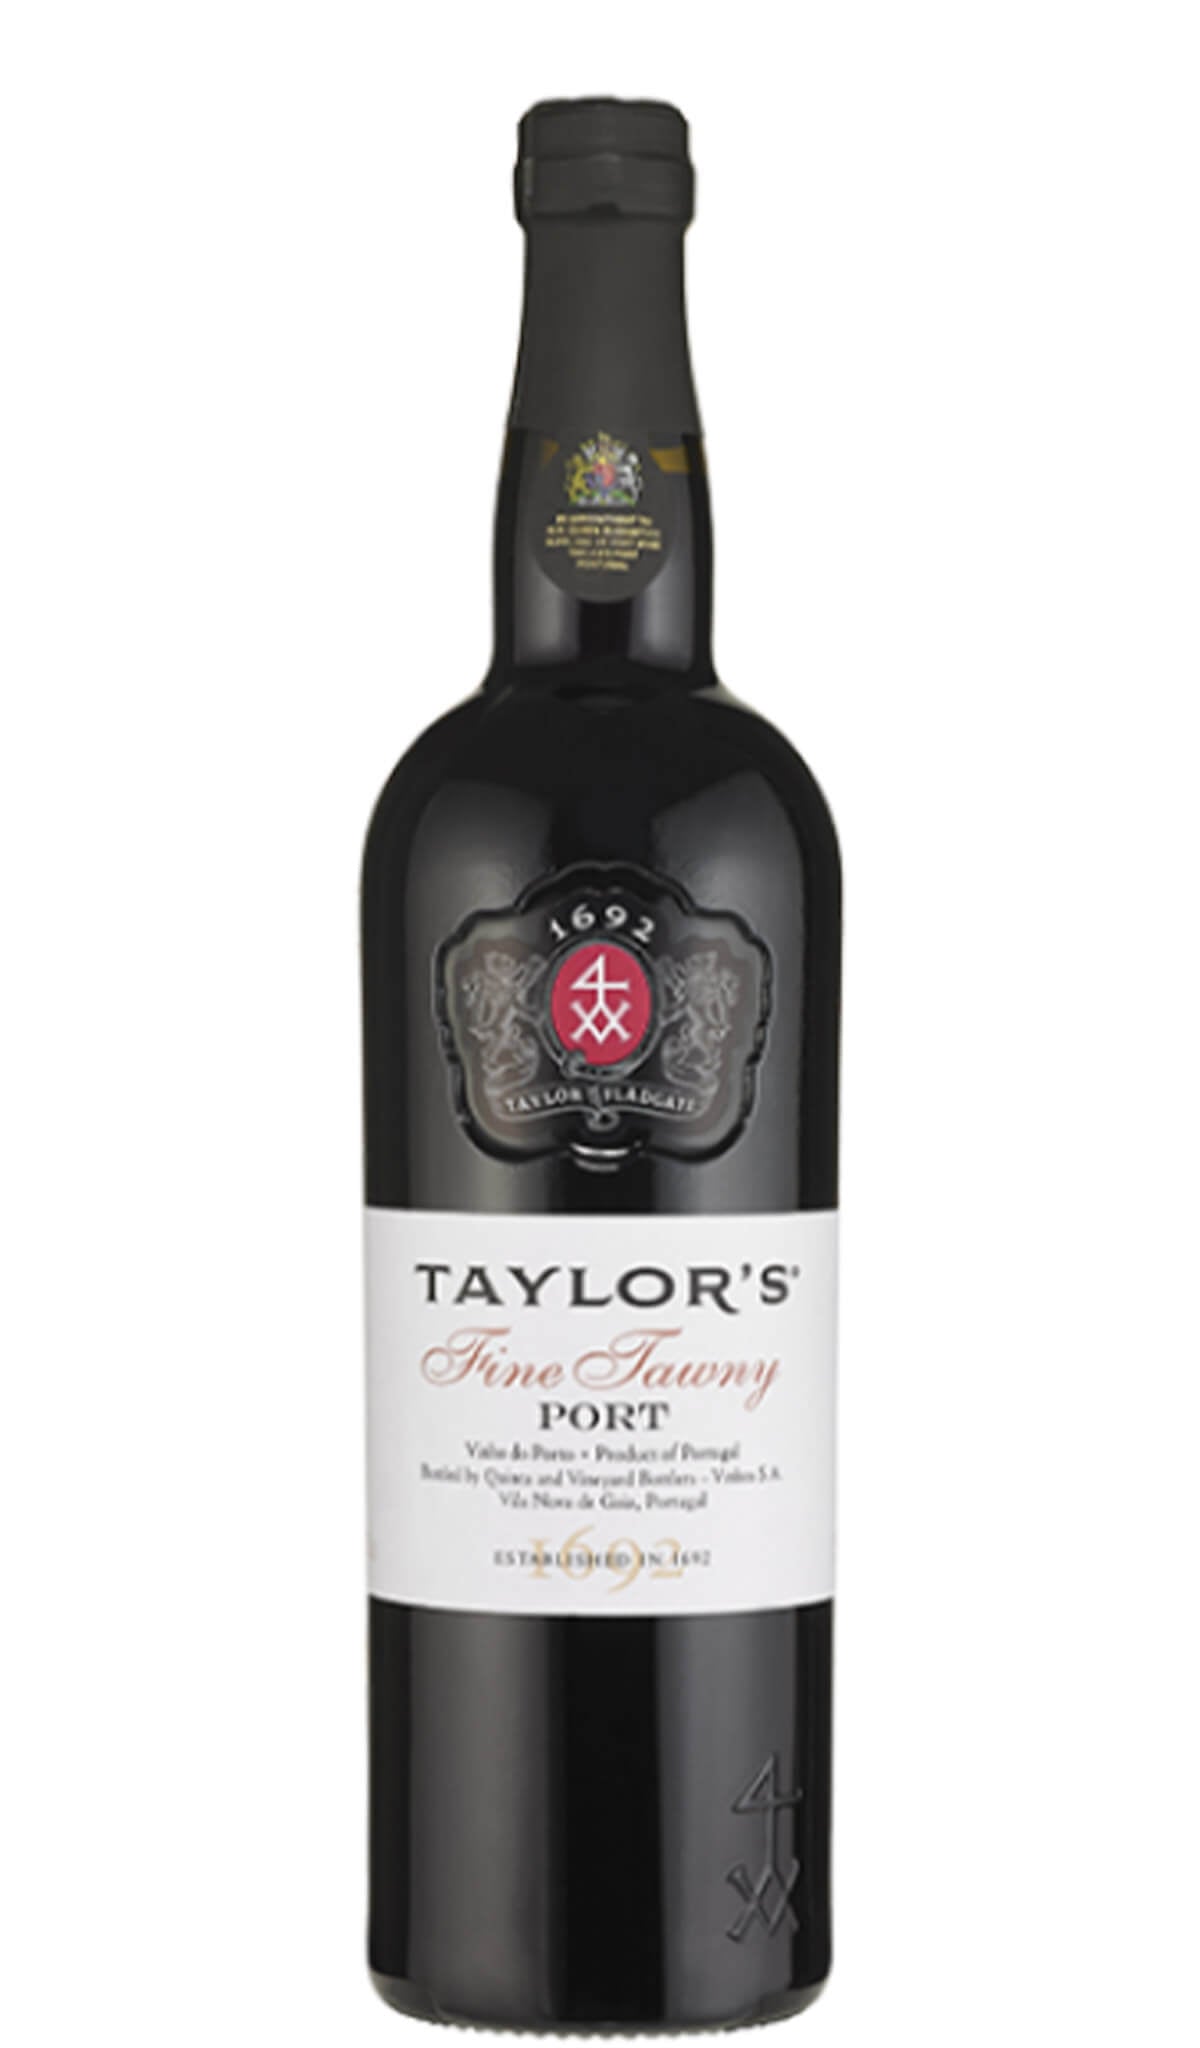 Find out more, explore the range and buy Taylor’s Fine Tawny Port 750ml (Portugal) available online at Wine Sellers Direct - Australia's independent liquor specialists.